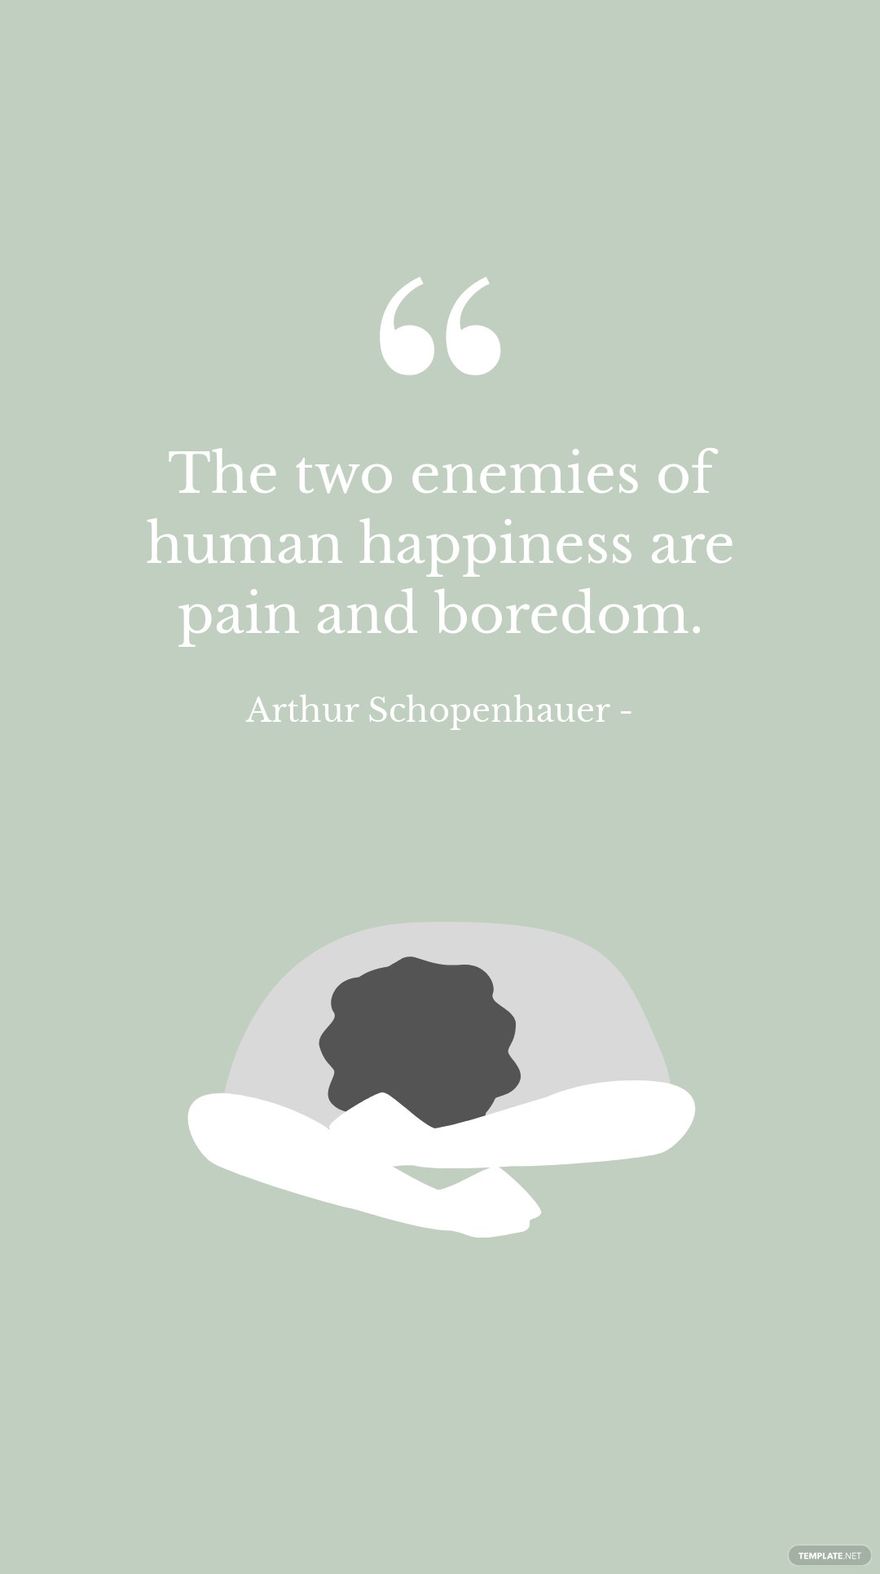 Arthur Schopenhauer - The two enemies of human happiness are pain and boredom.